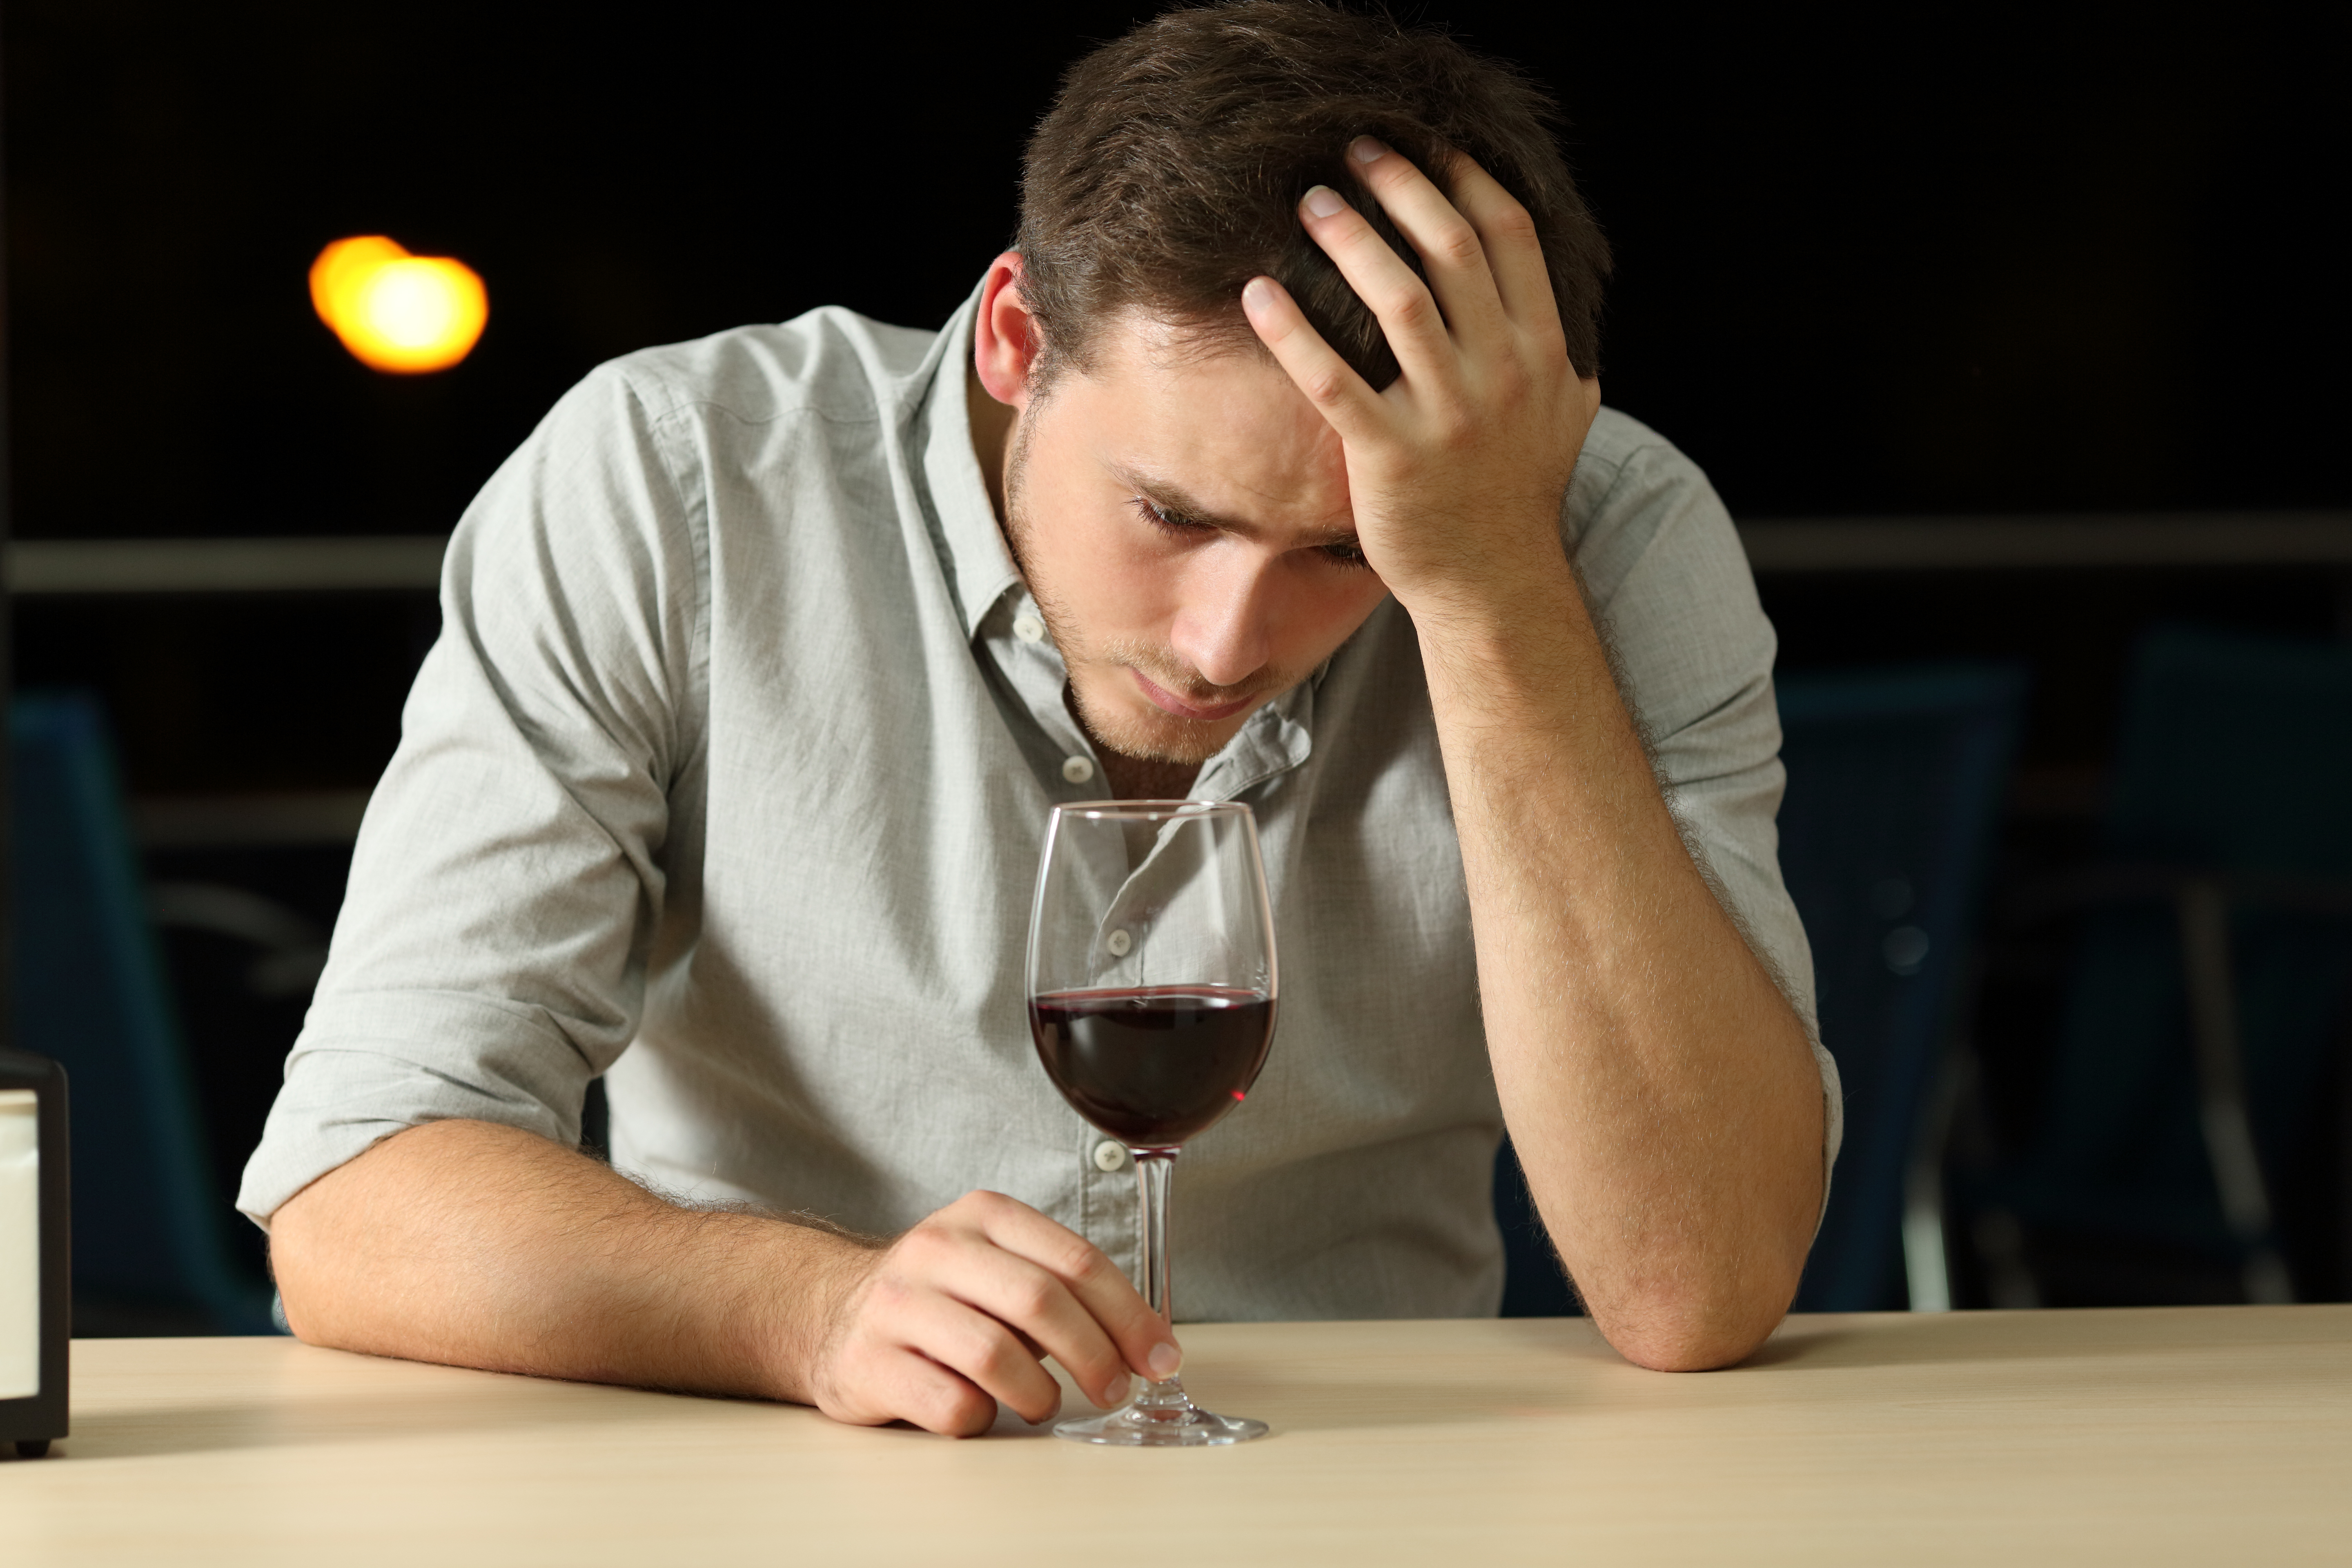 Sad man sitting alone with a drink | Source: Shutterstock